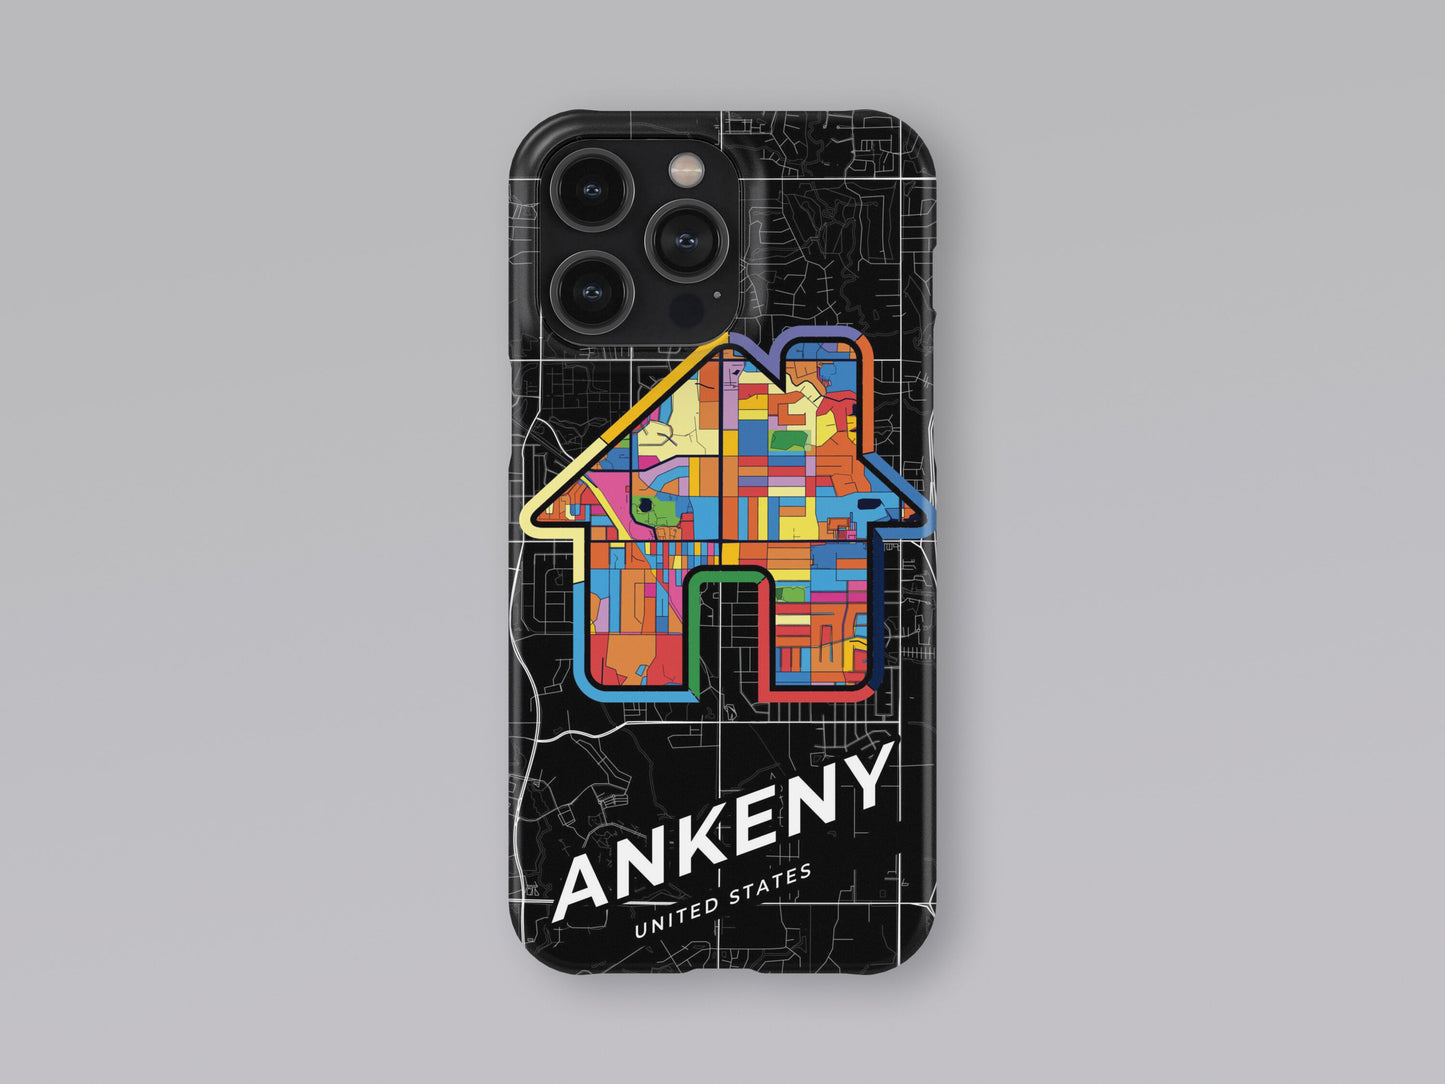 Ankeny Iowa slim phone case with colorful icon. Birthday, wedding or housewarming gift. Couple match cases. 3